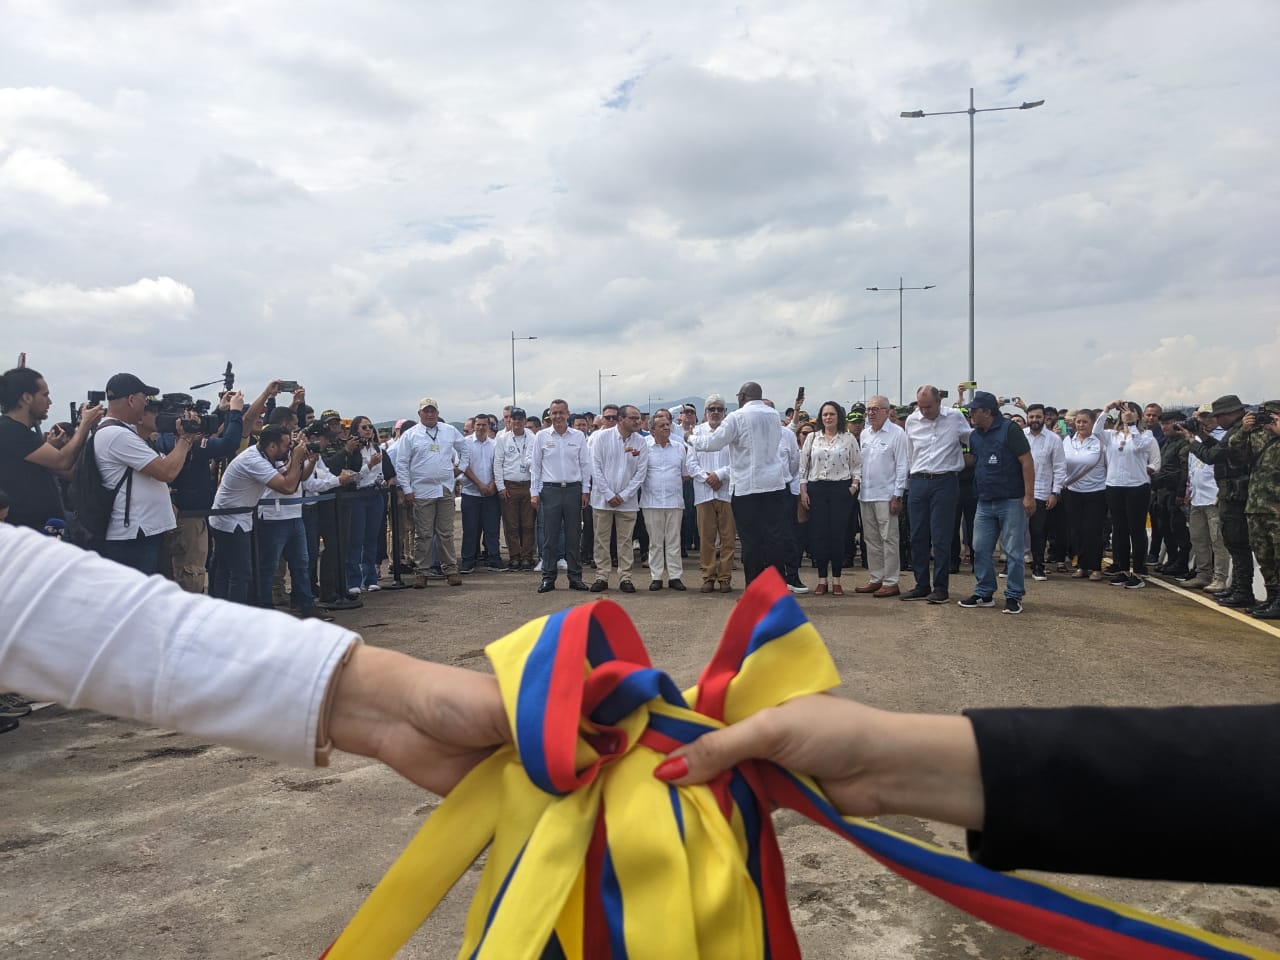 National President celebrated the opening of a new Venezuela-Colombia connection